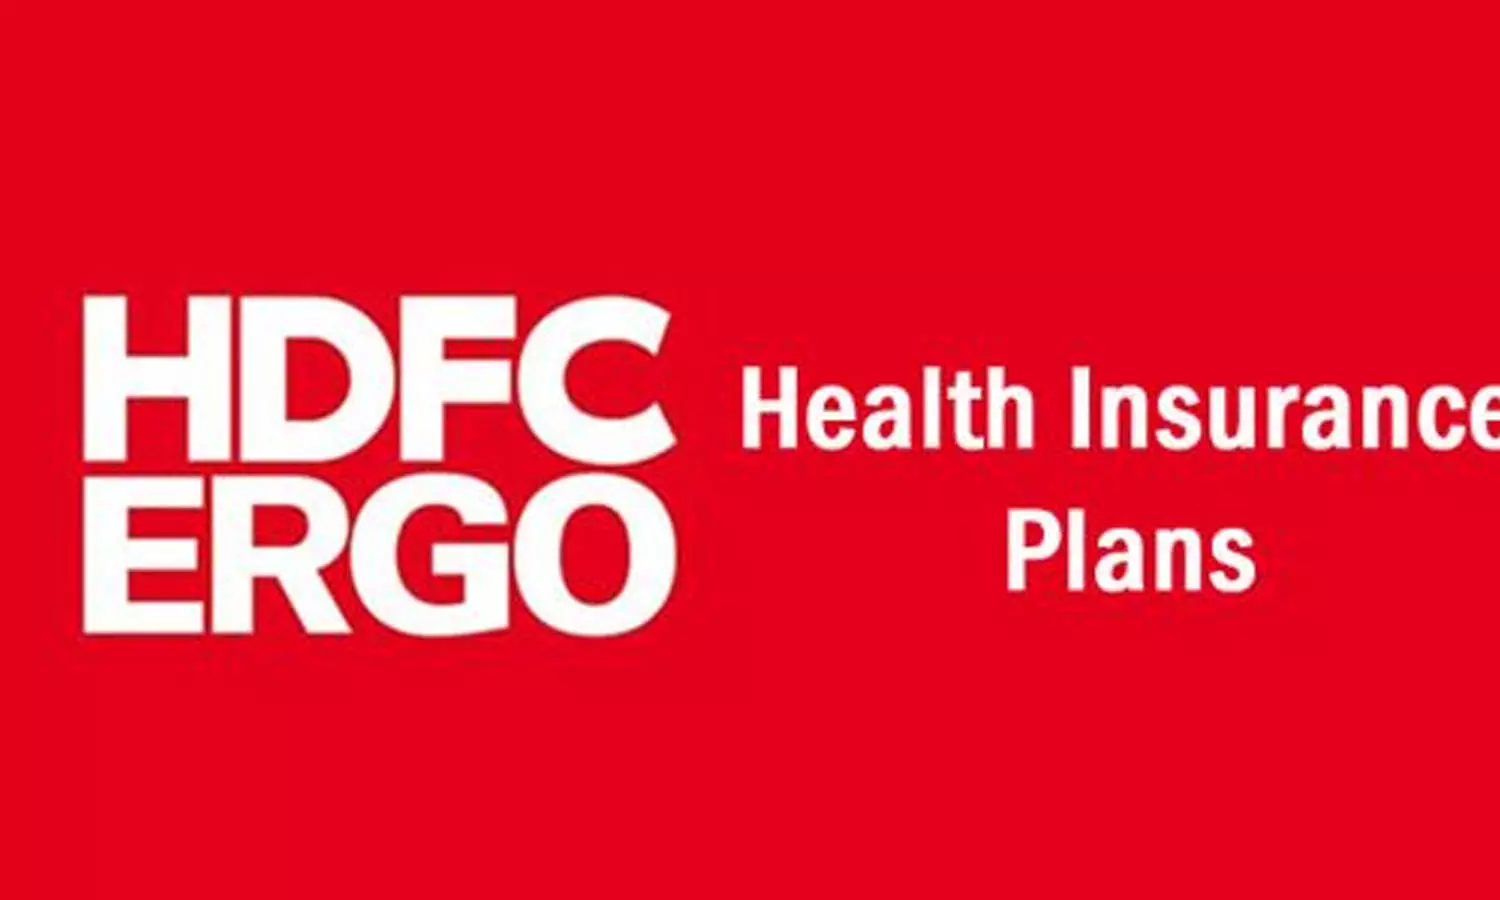 HDFC ERGO asked to pay Rs 1 lakh as compensation over denying insurance